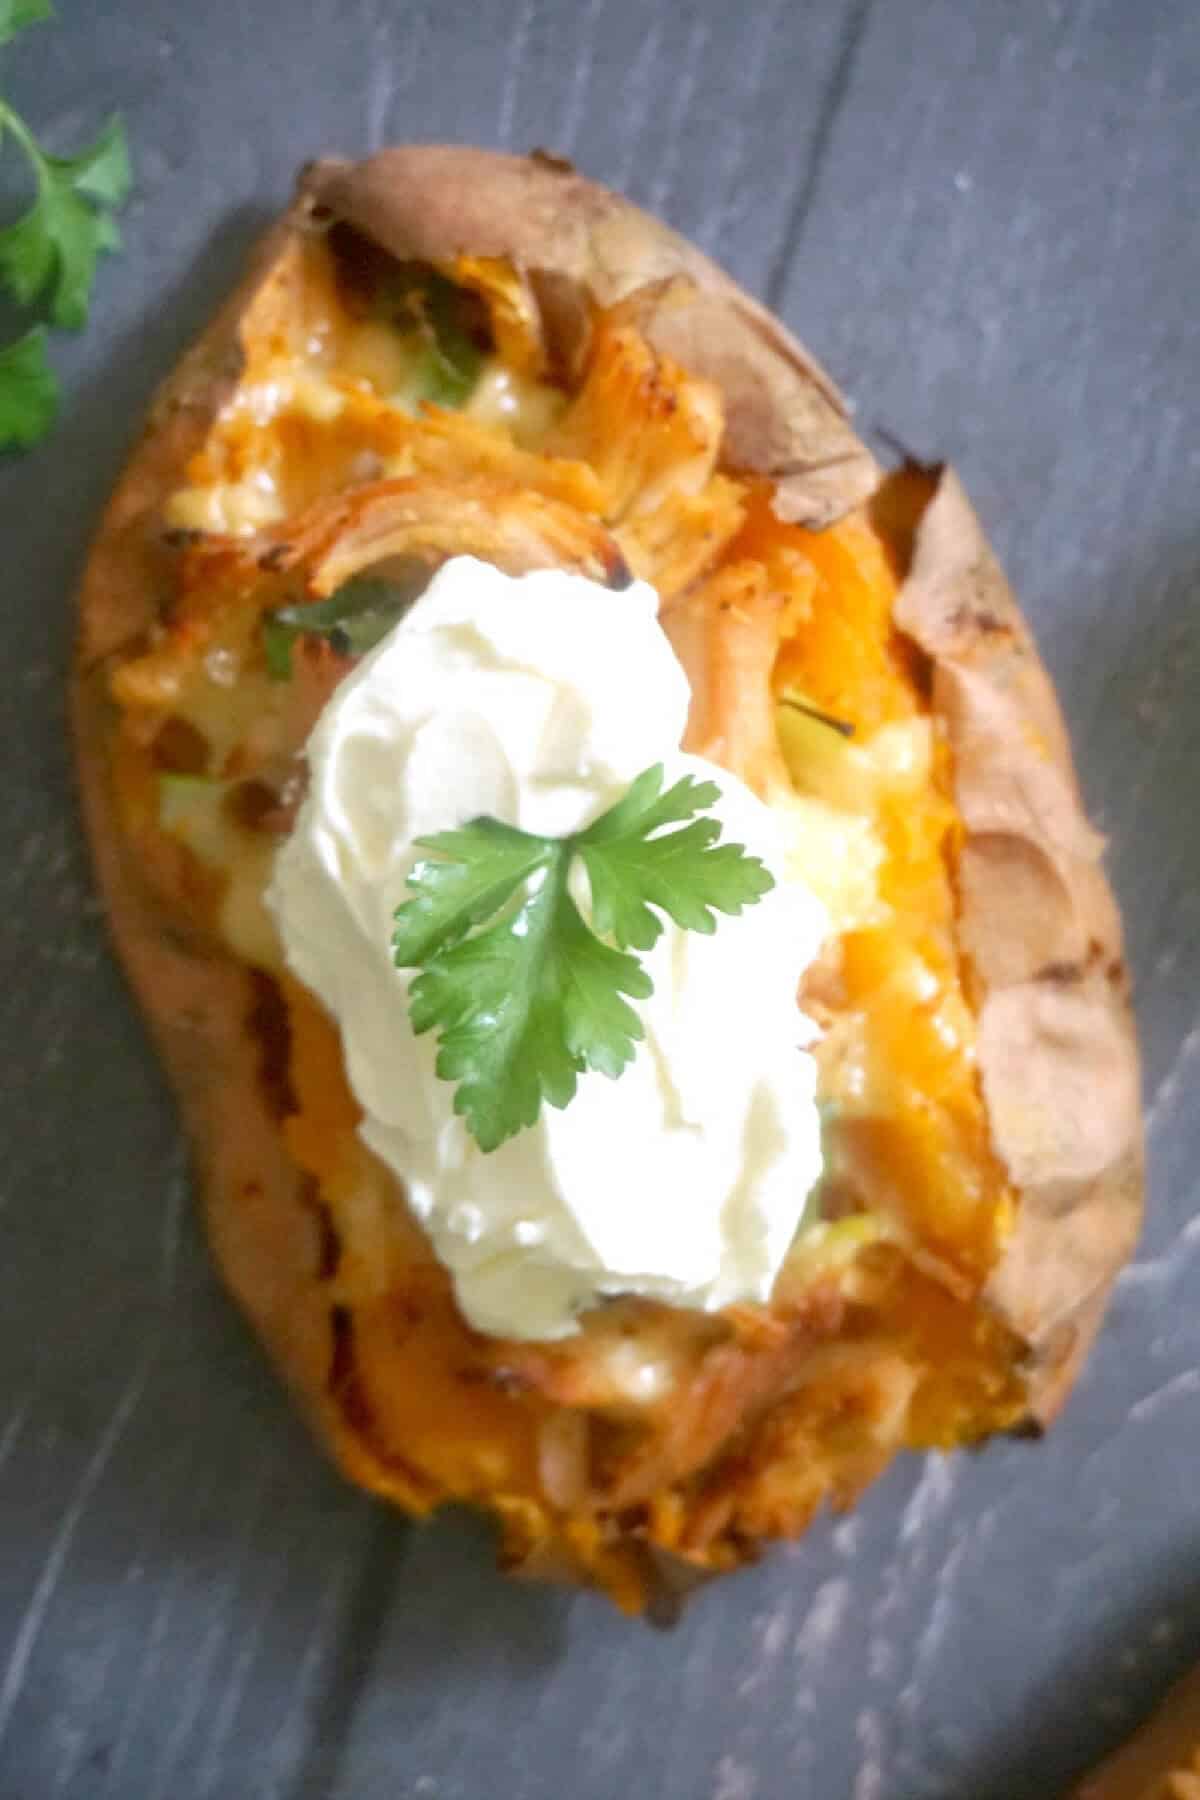 A sweet potato topped with yogurt and parsley.